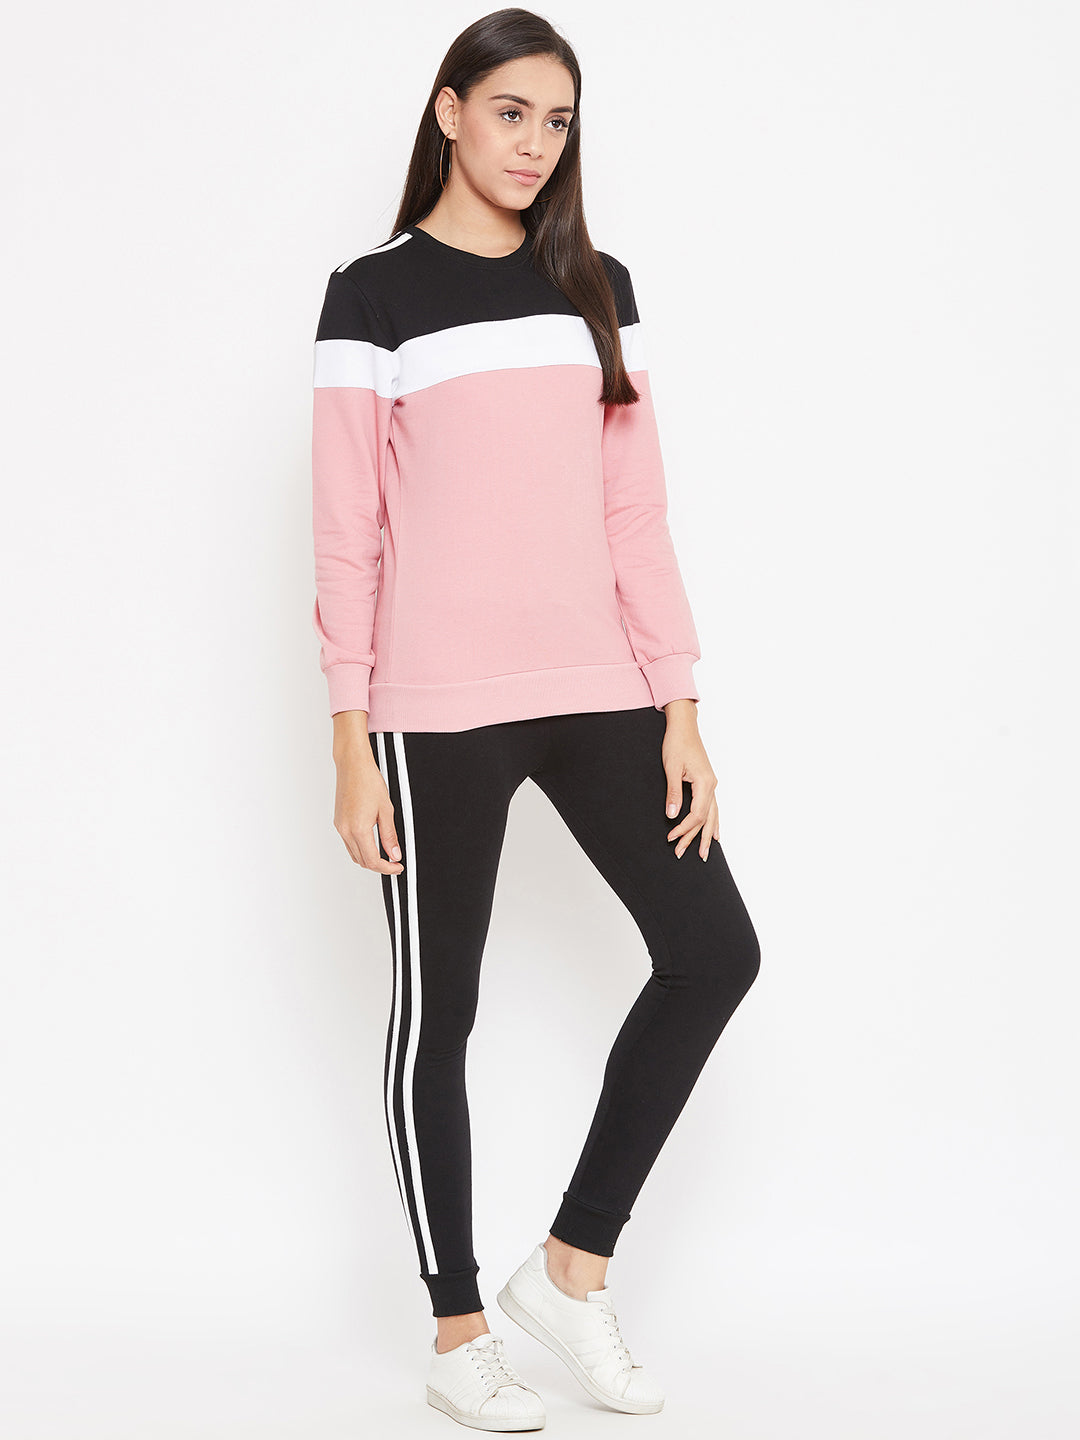 Austin Wood Women'sPink Full Sleeves Colorblocked Round Neck Tracksuit